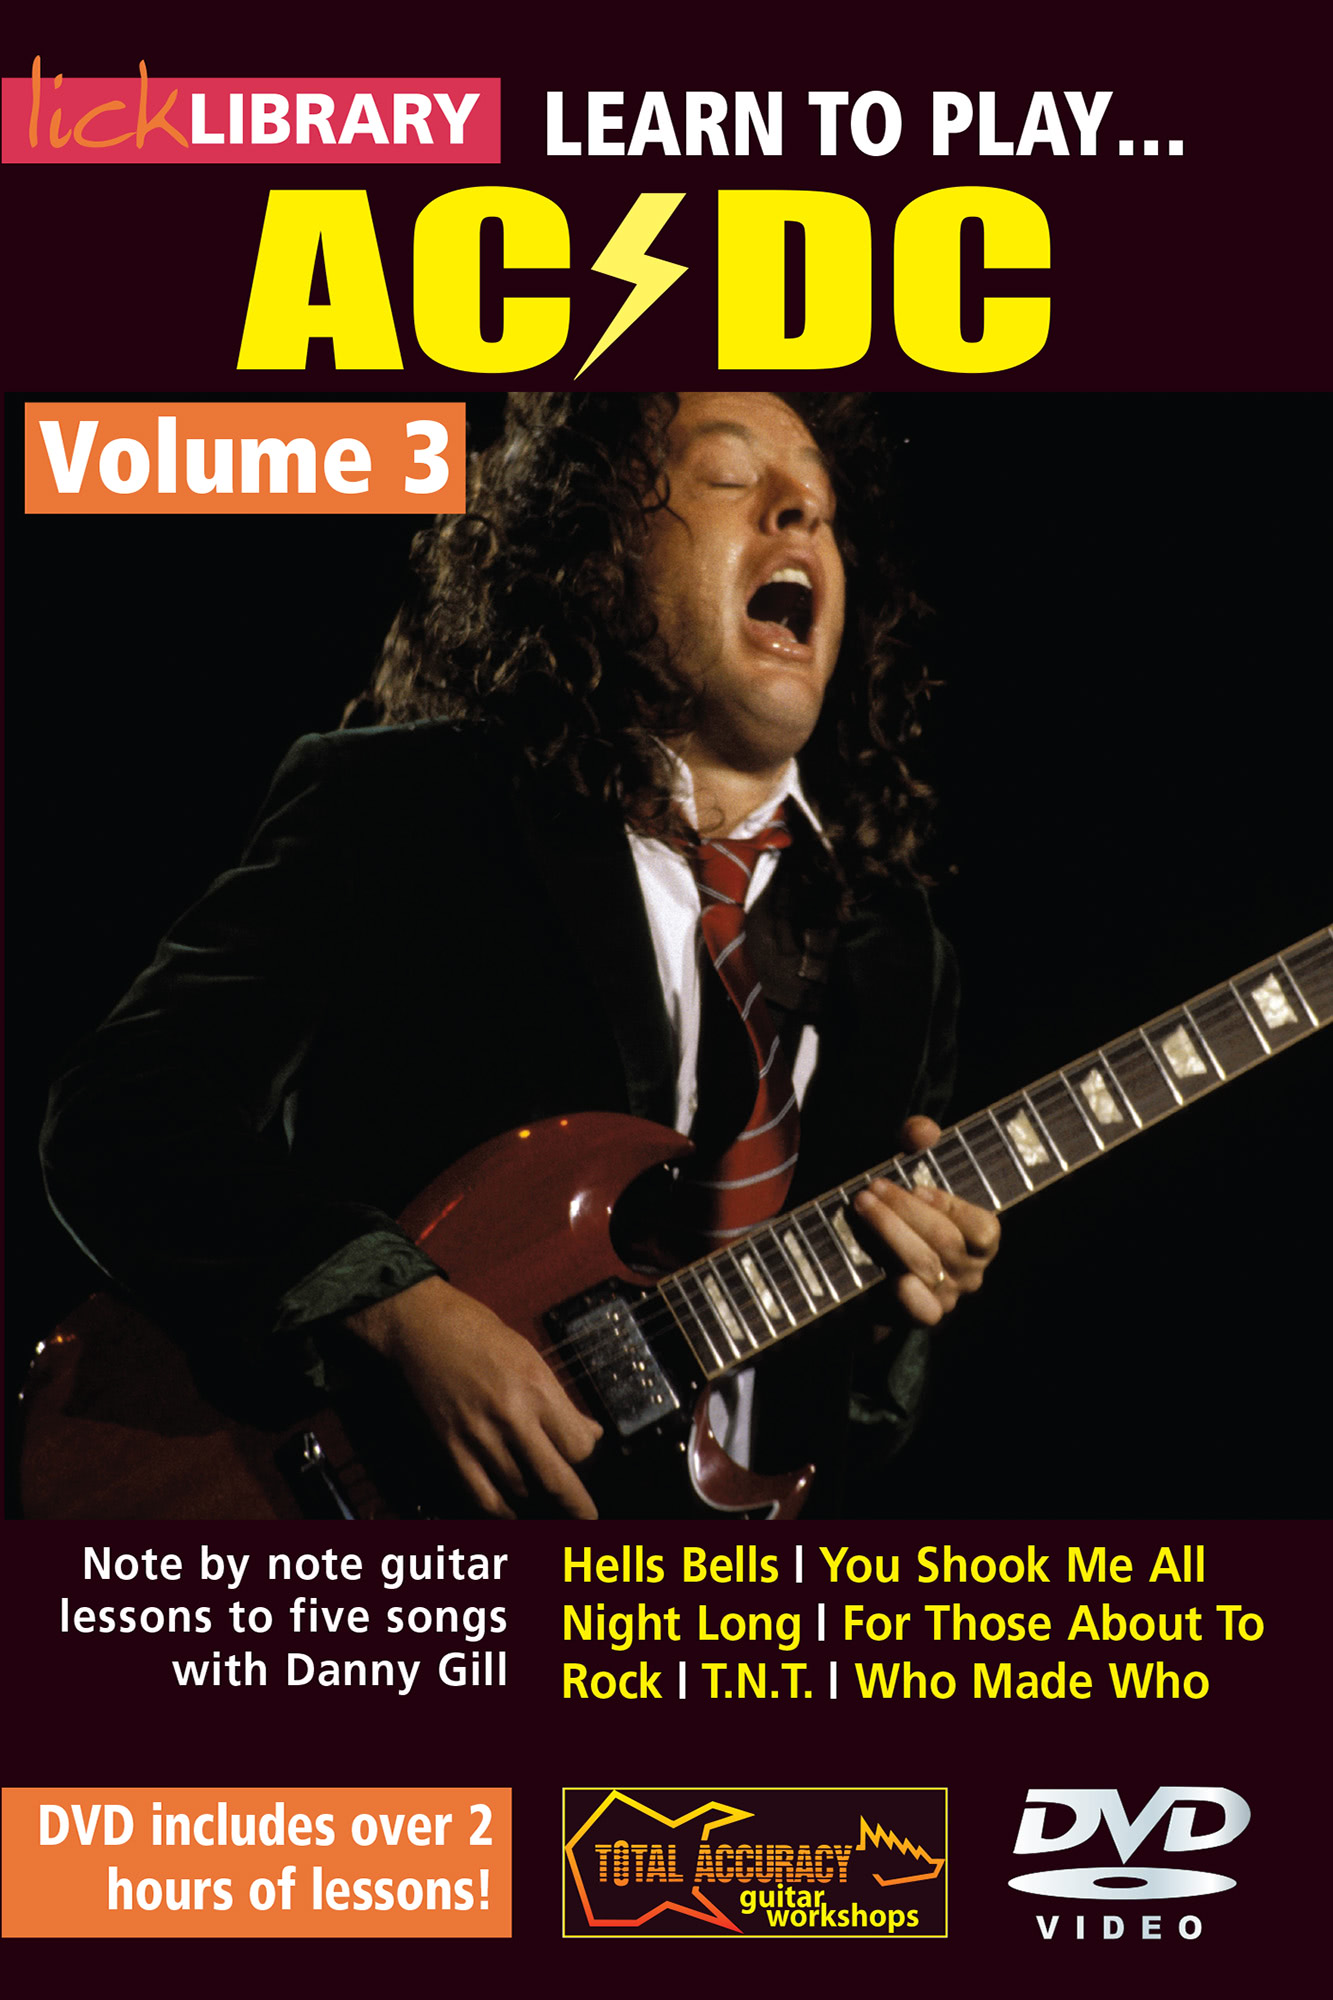 Learn To Play AC/DC Volume 3